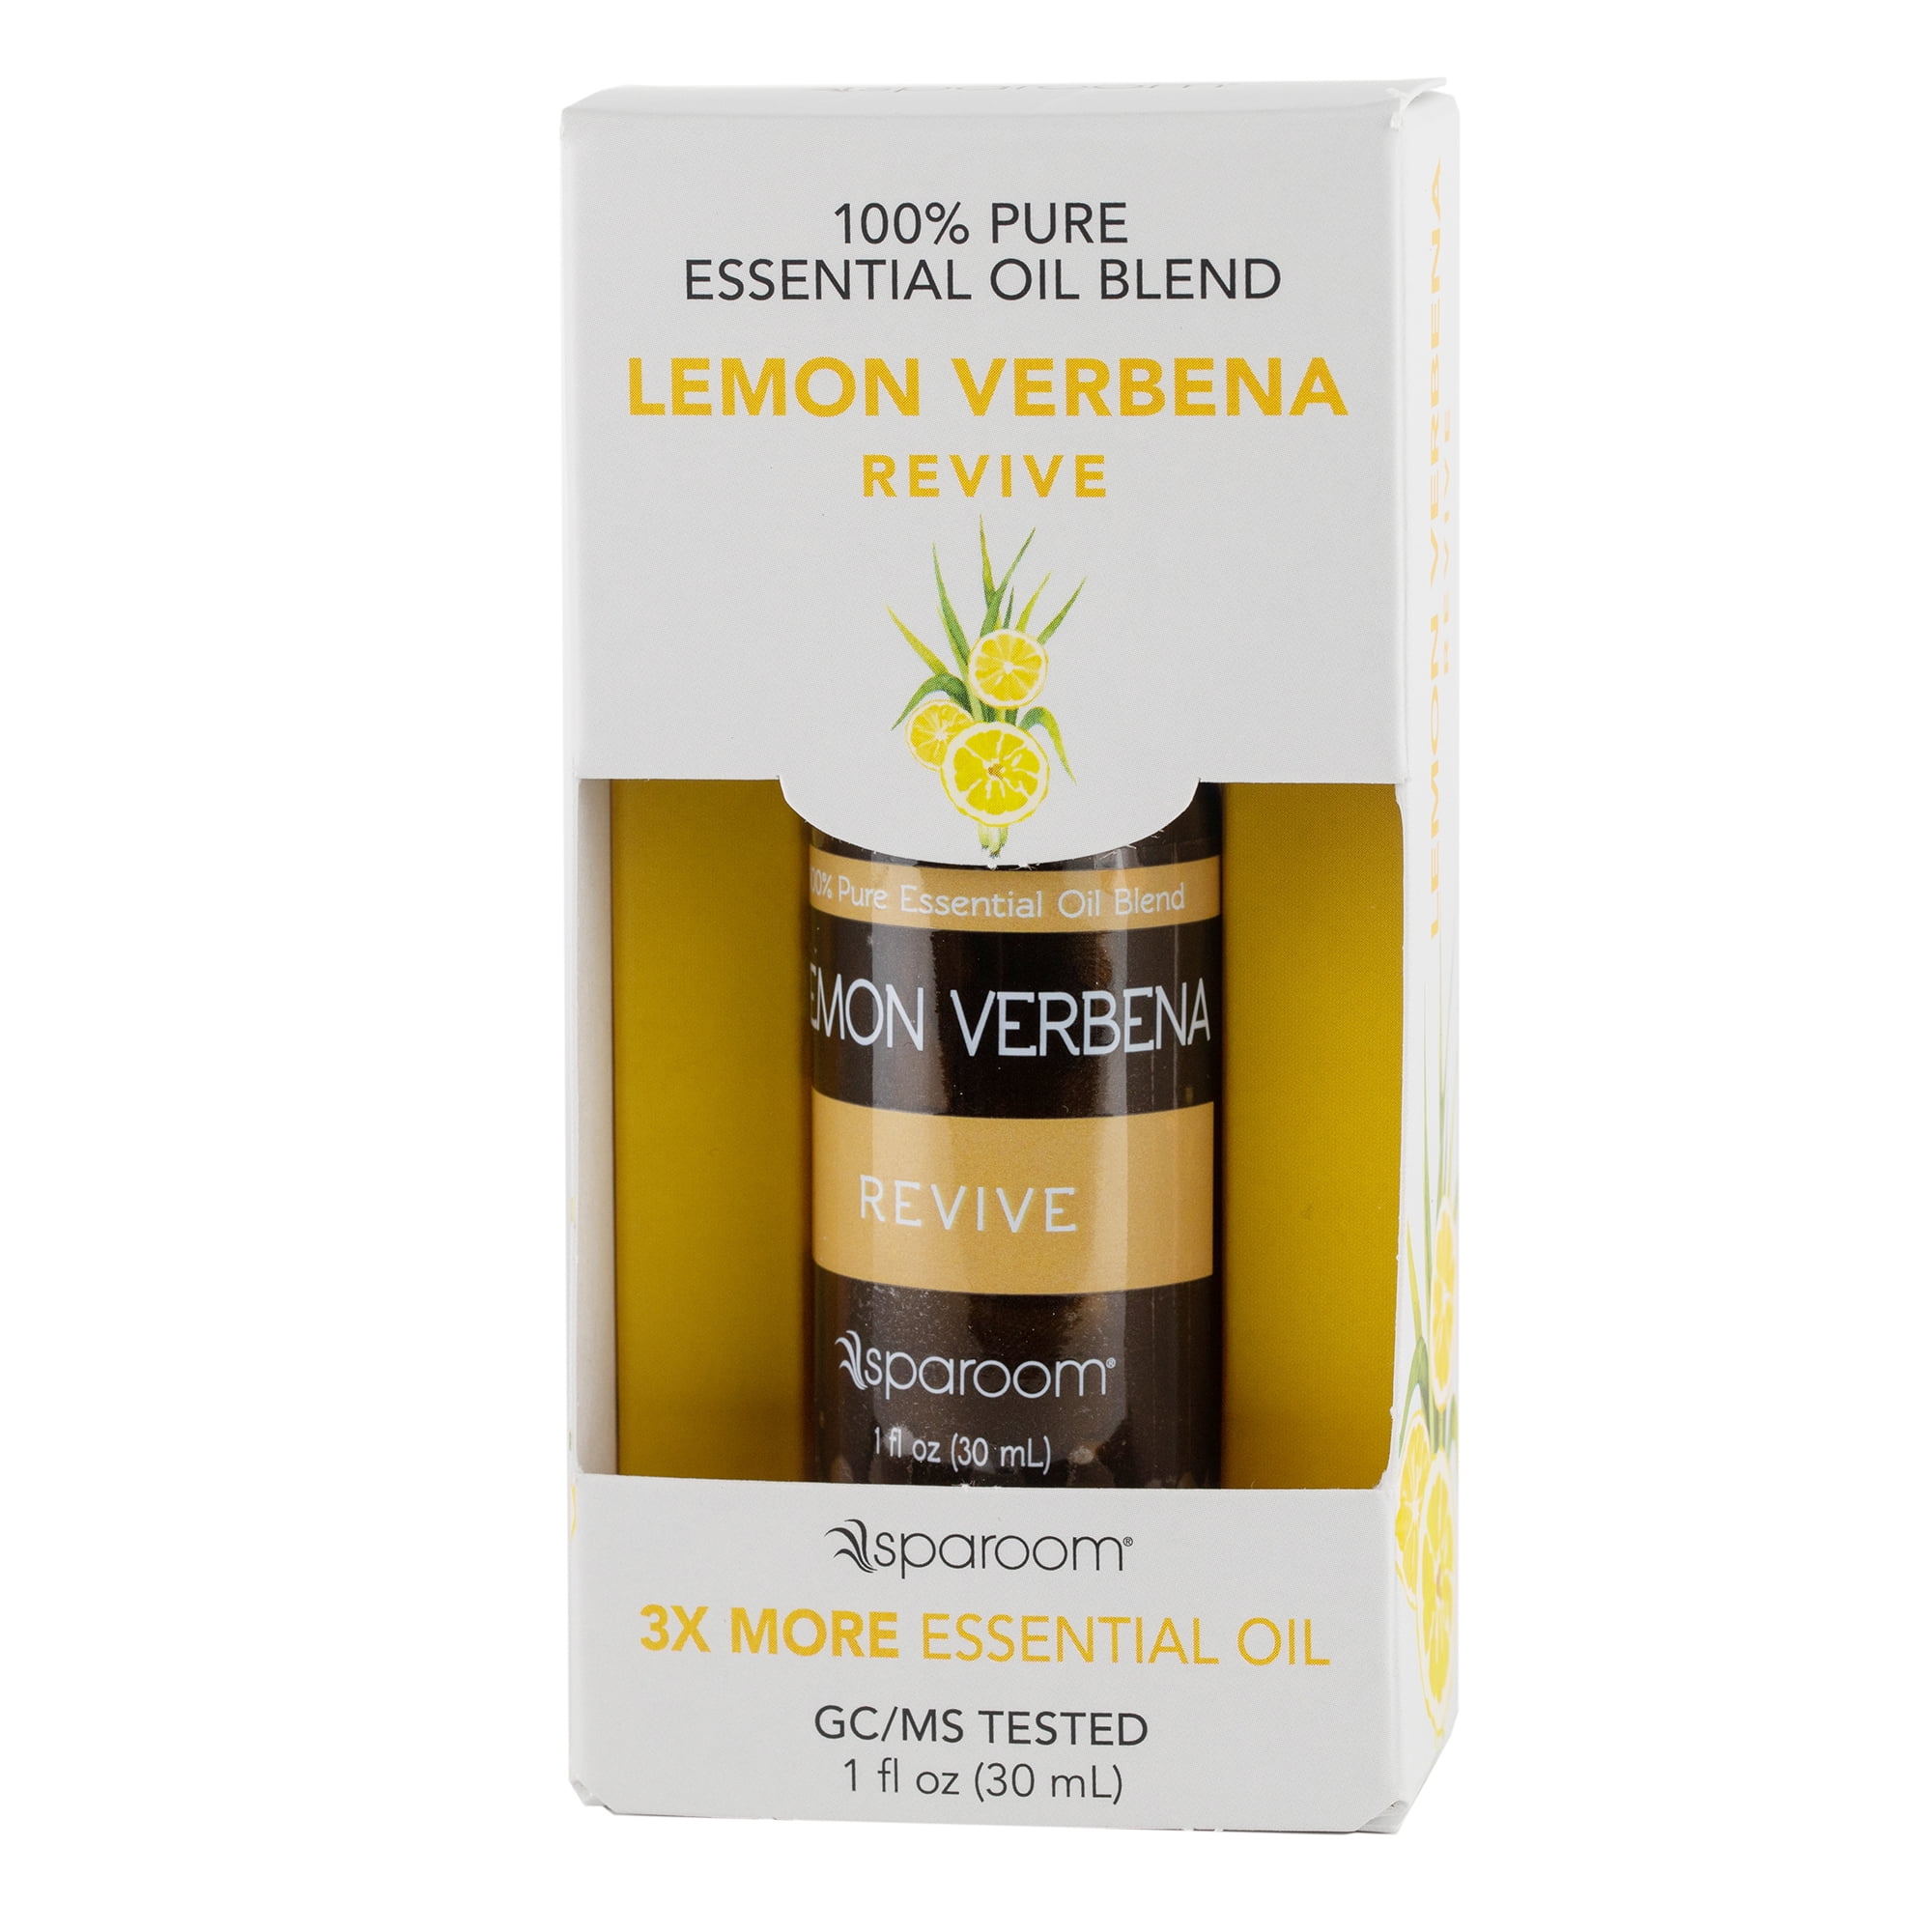 Essentially Stephanie - Meet your new favorite oil. Lemon Verbena! Lemon  Verbena is the newest oil in the Young Living product lineup! Lemon Verbena  contains antioxidants, purifies and refreshes the air when